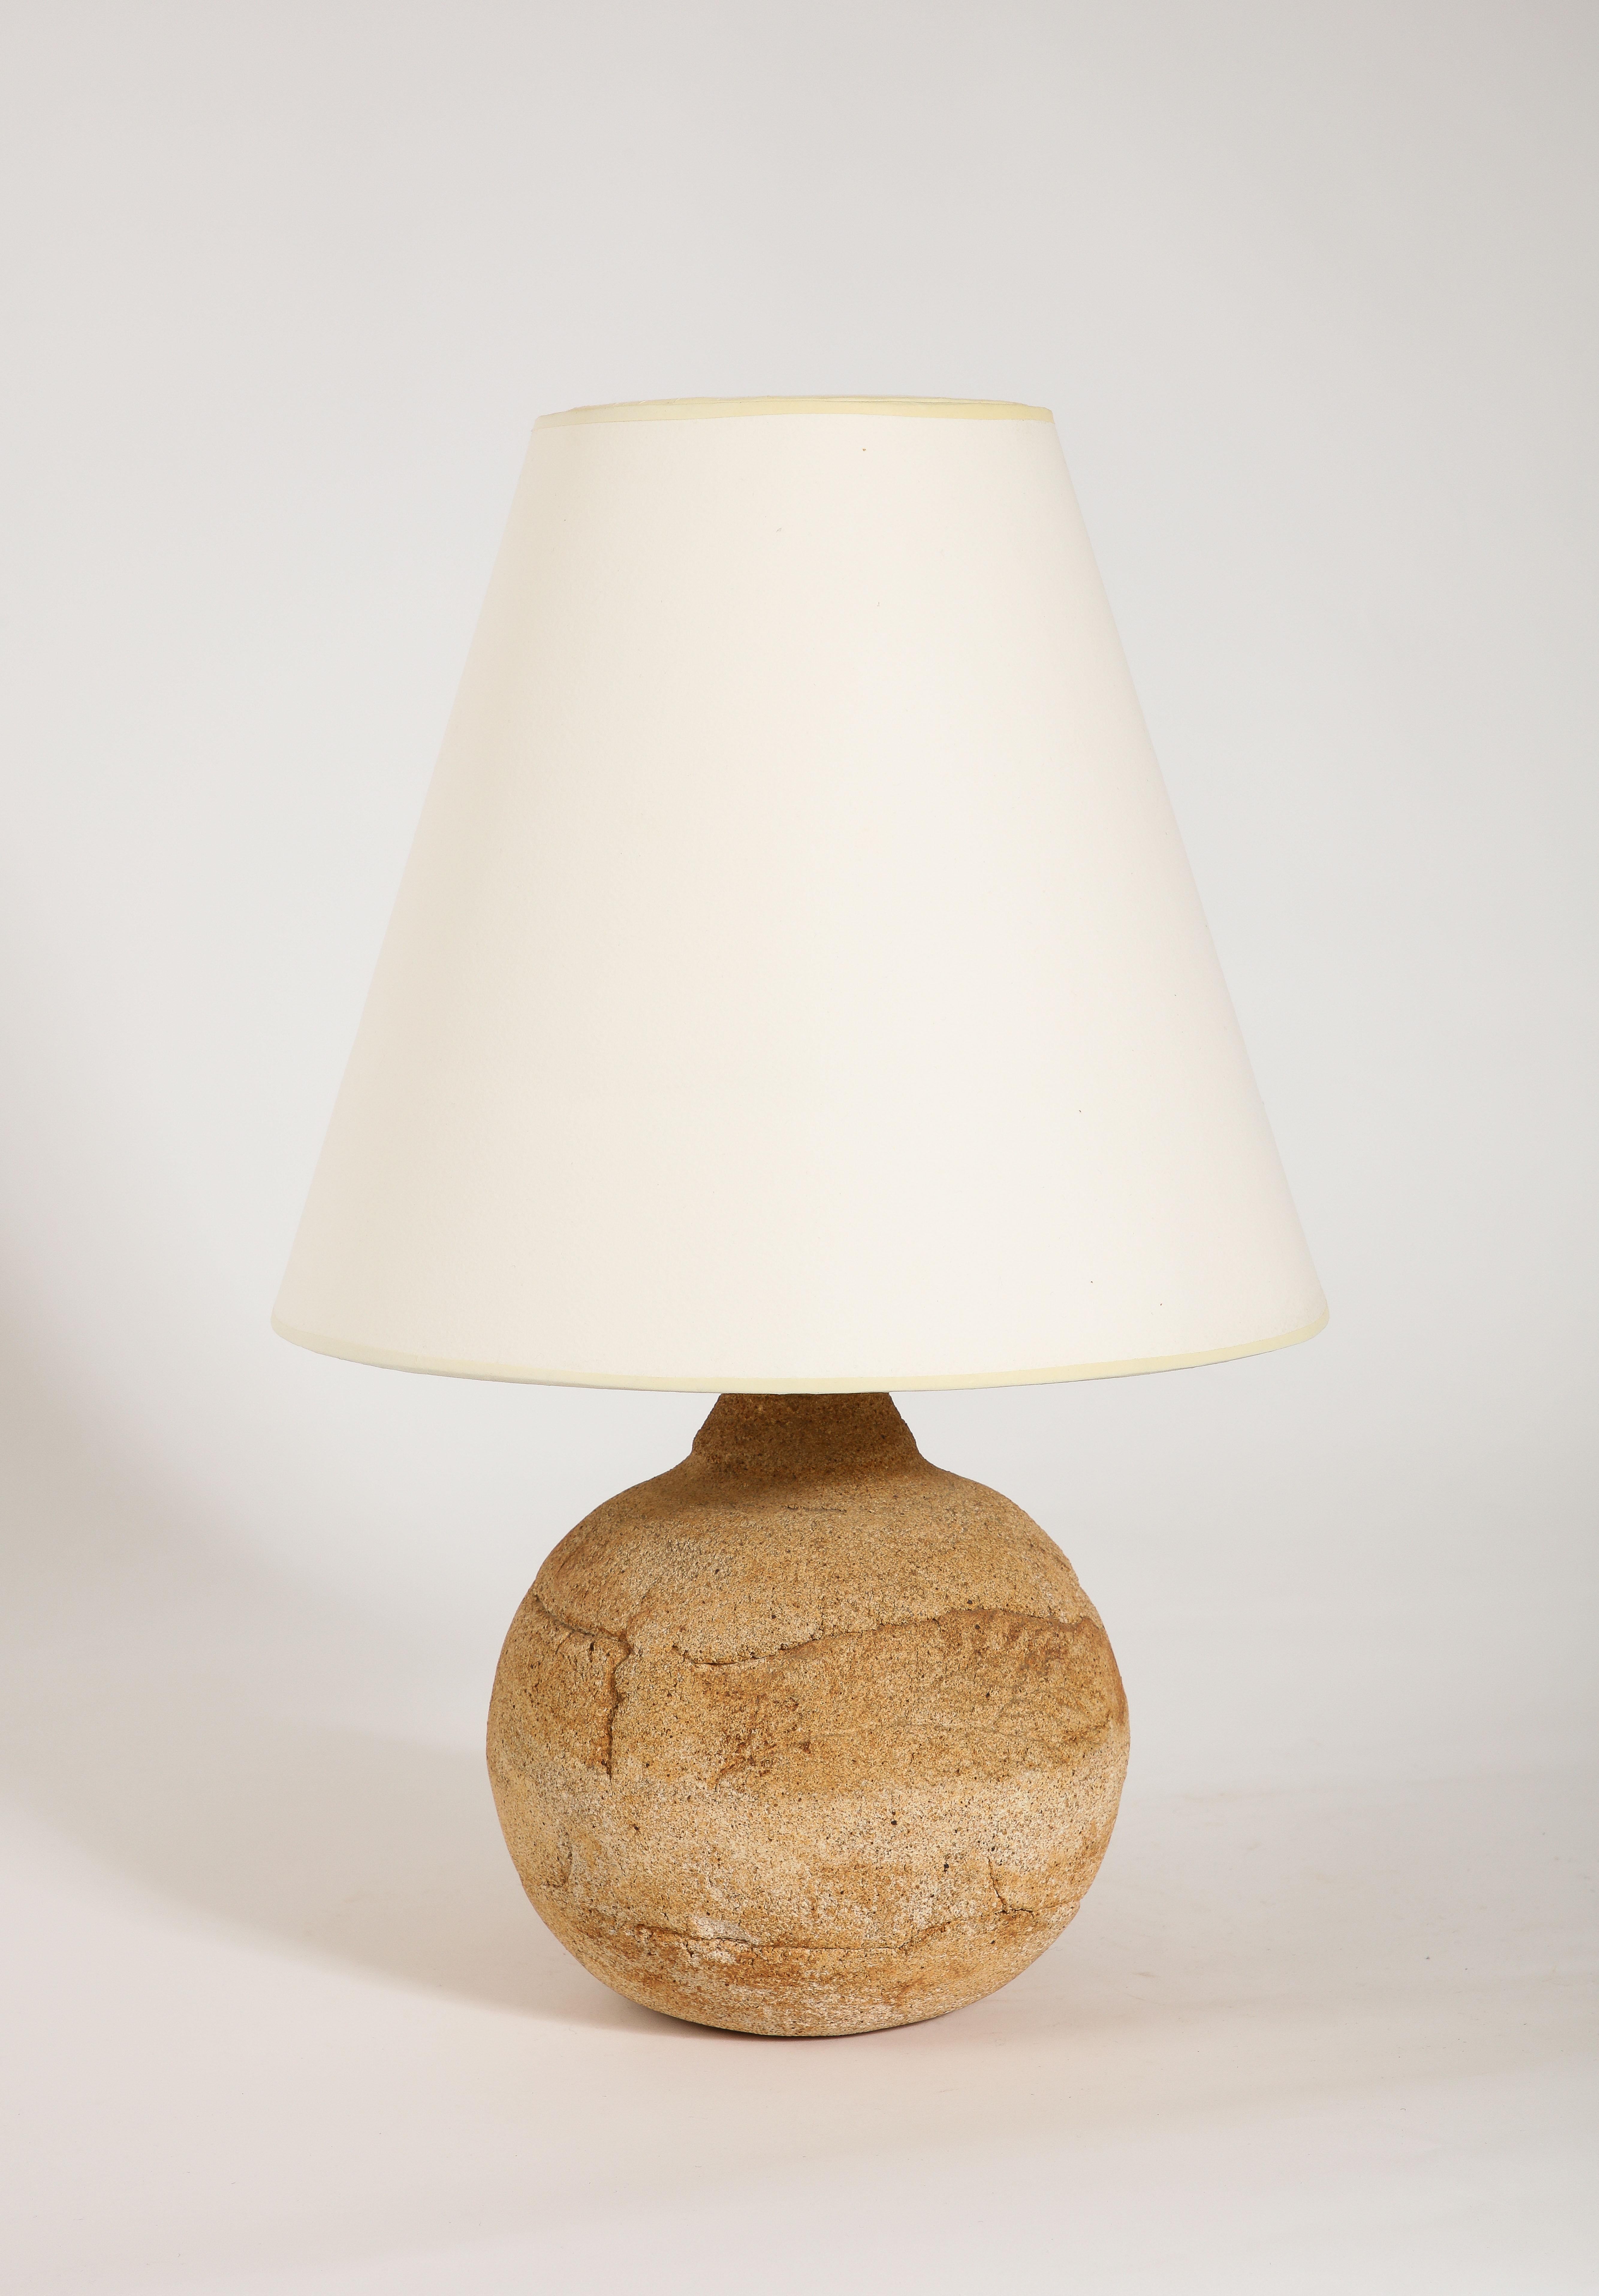 Layered Earthenware Table Lamp, France 1960's For Sale 3